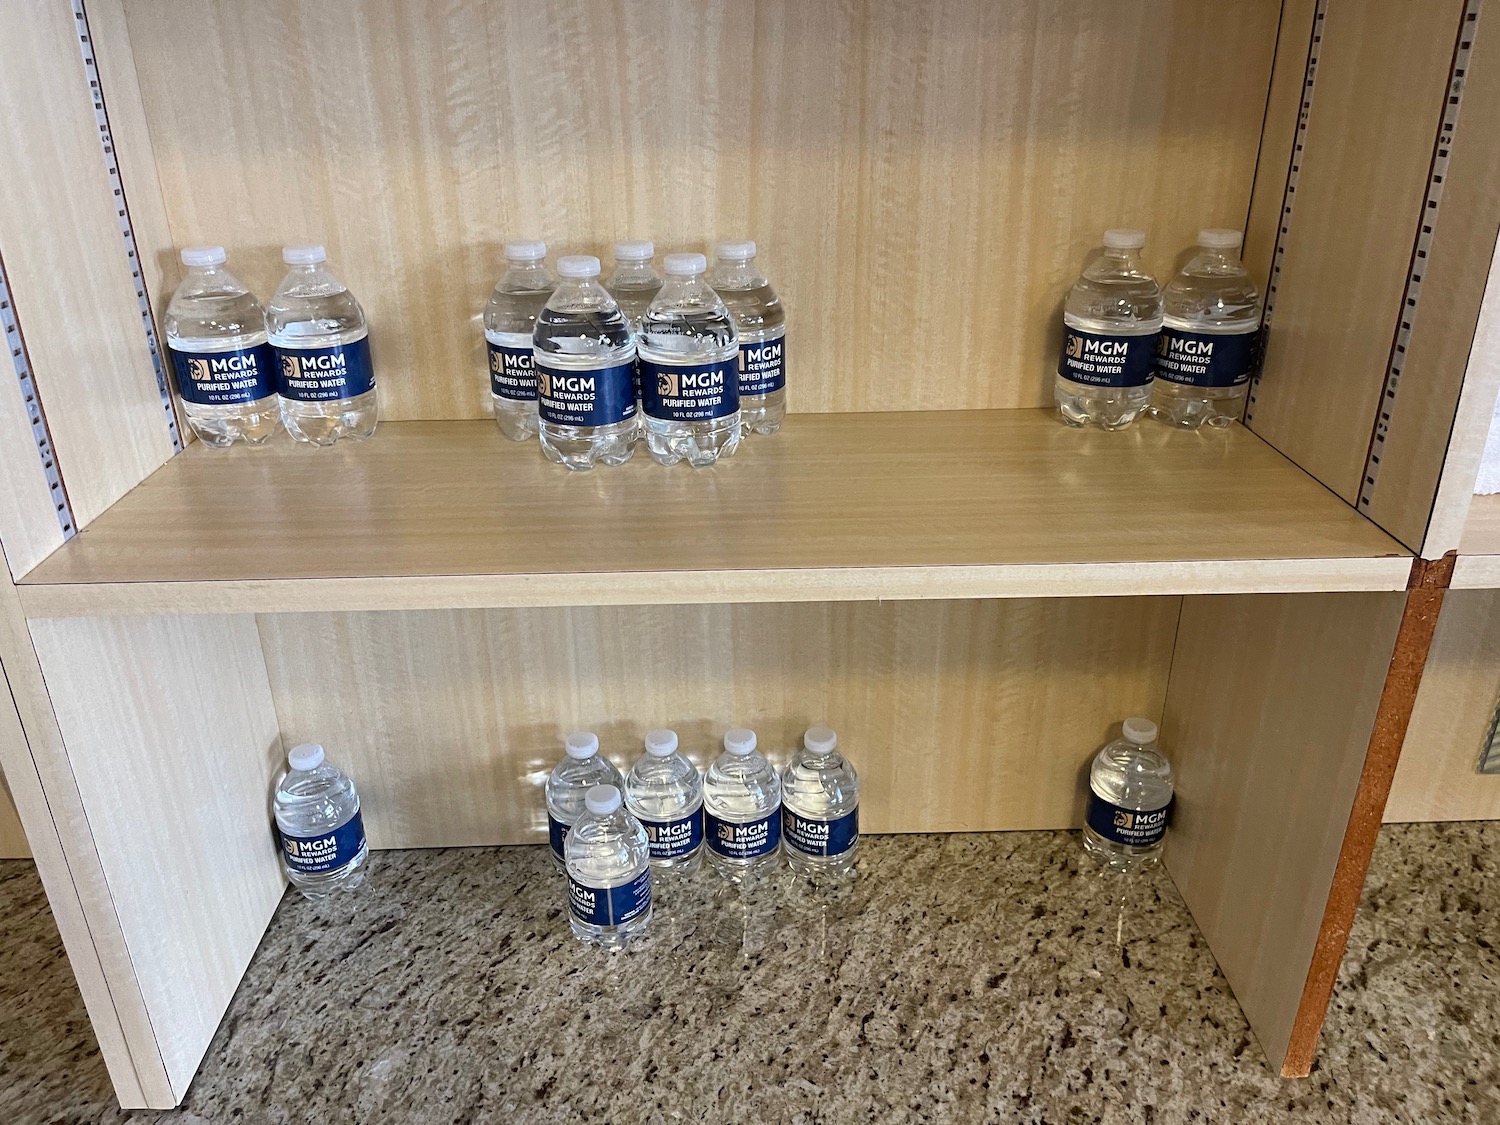 a shelf with water bottles on it